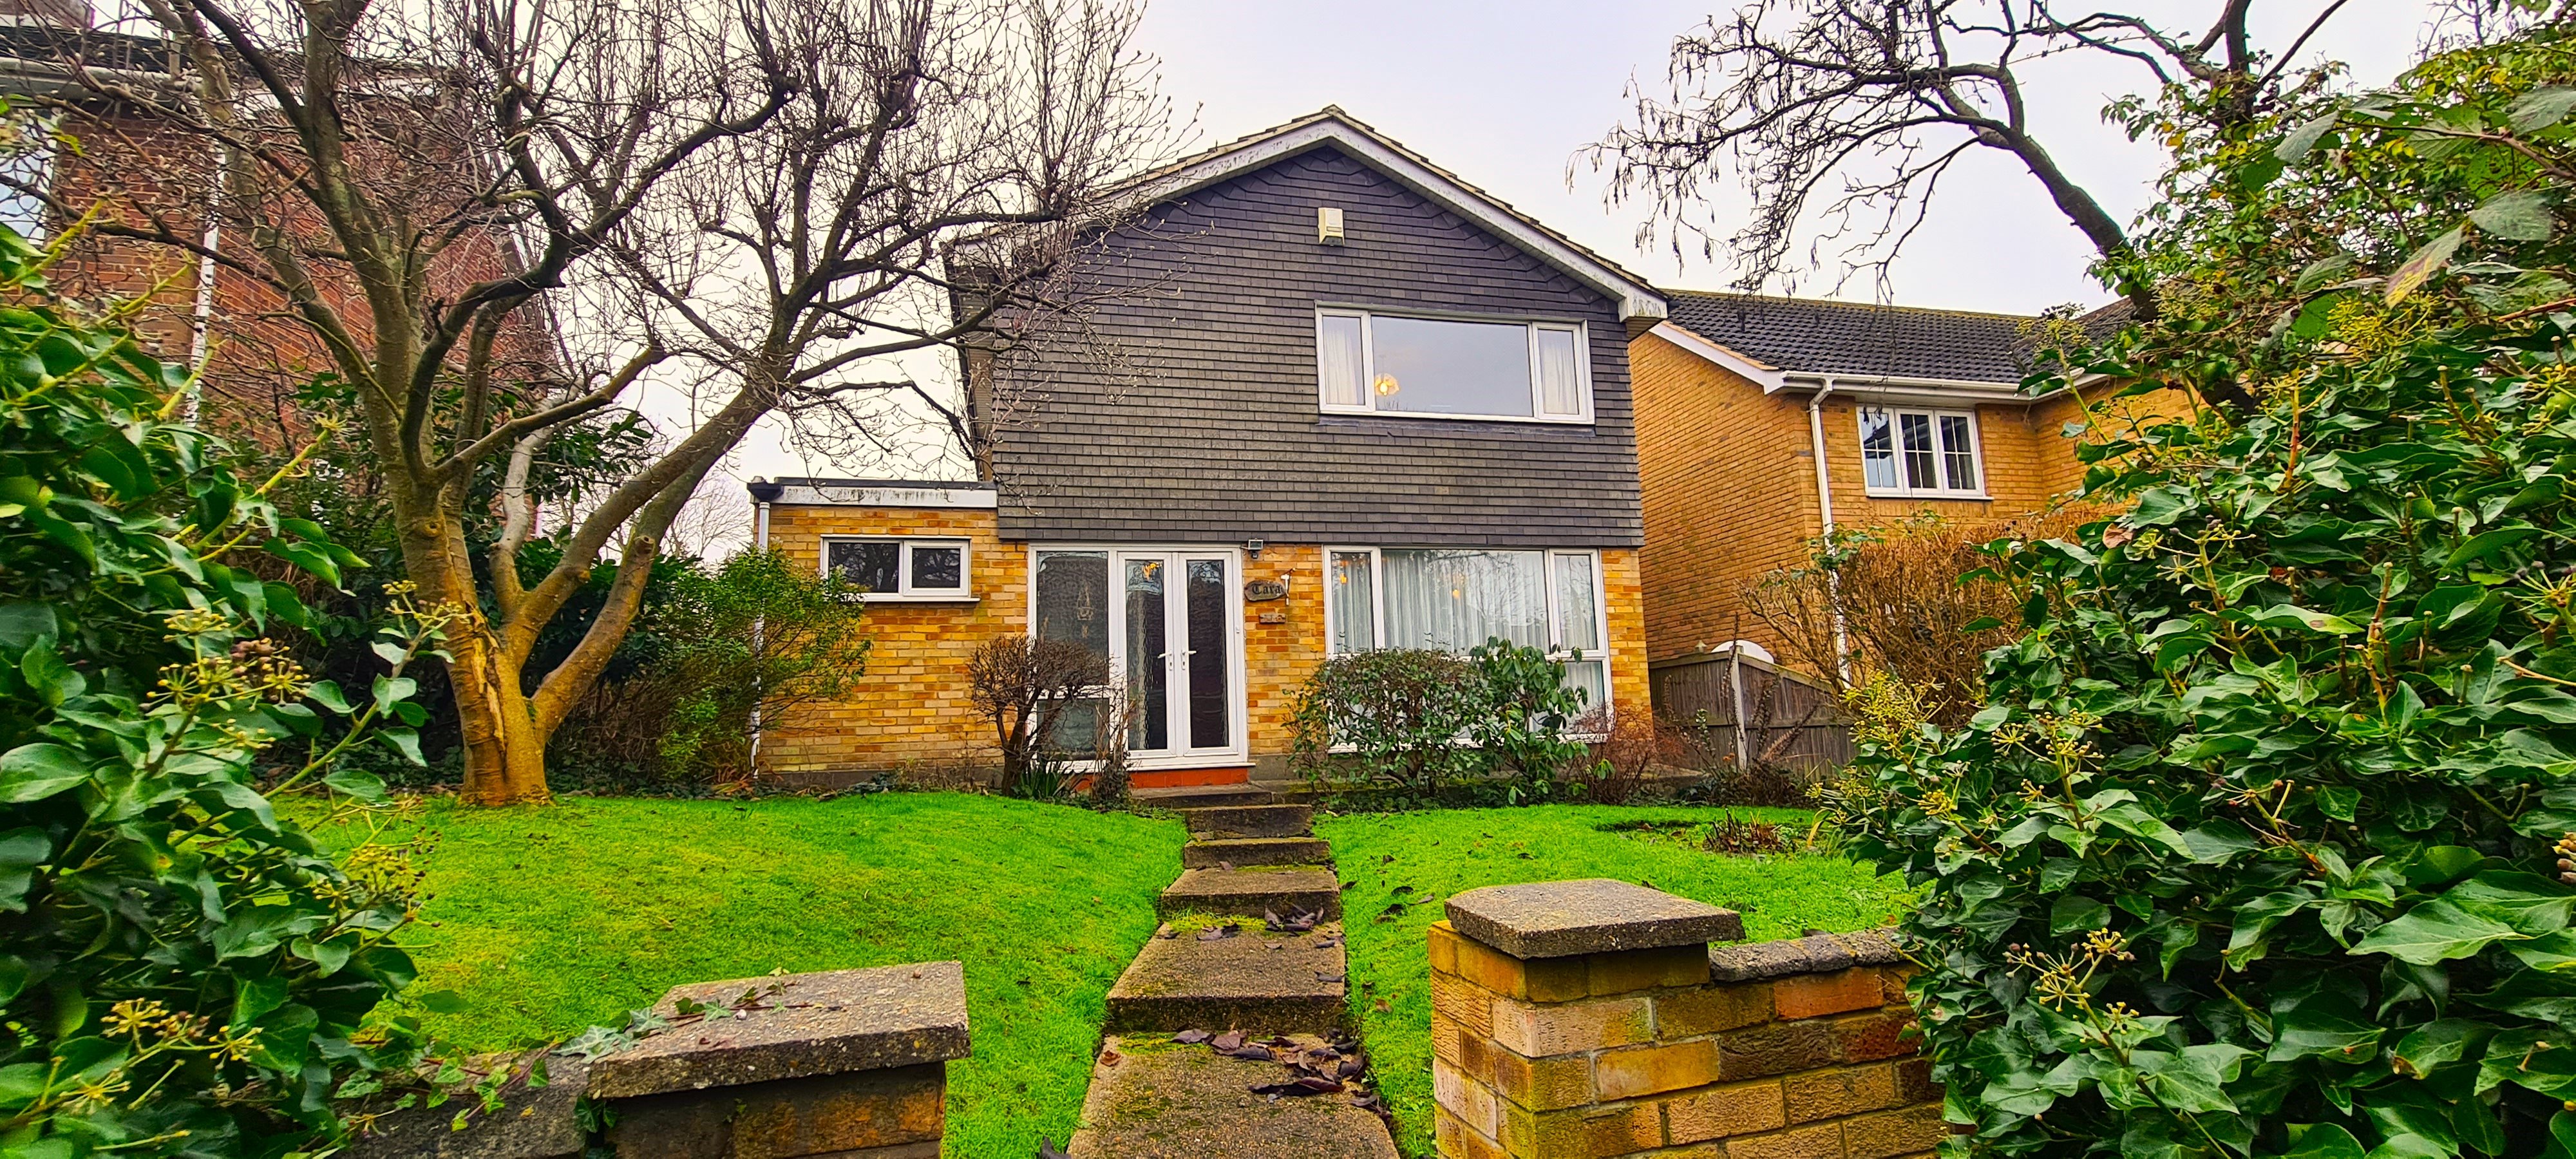 3 bed  for sale in Southend Road, Wickford, SS11